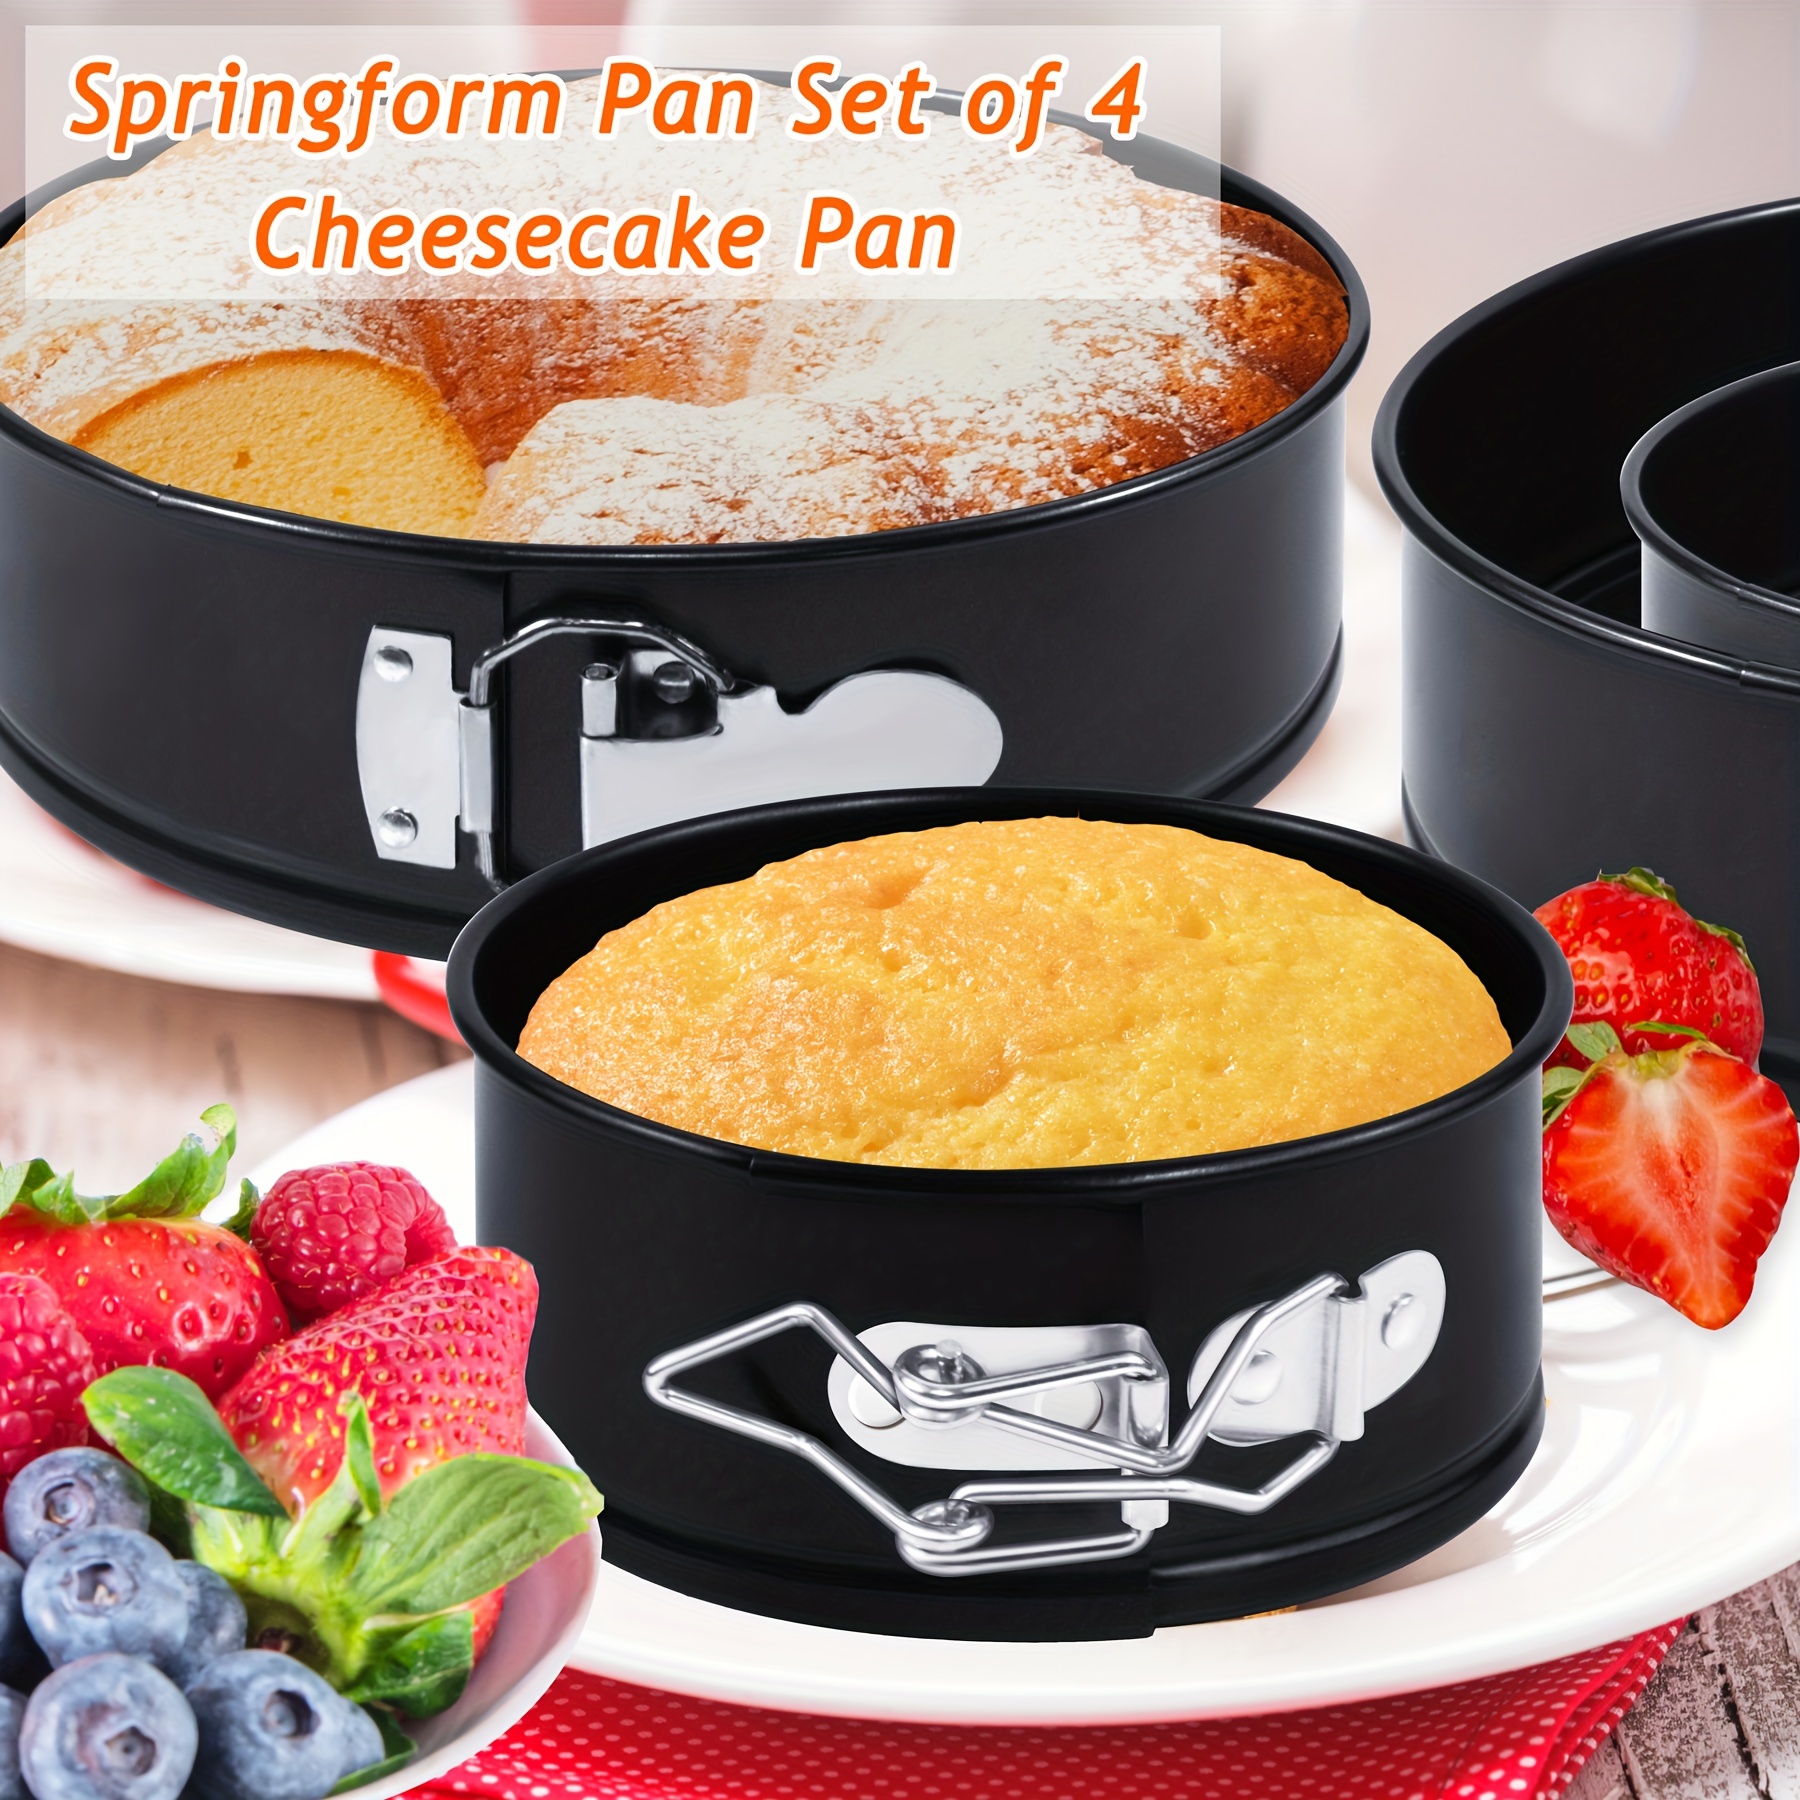  Webake Springform Pan 11 Inch Nonstick, Cheesecake Pan With  Removable Bottom Large Cake Tin Baking Mold for Thanksgiving Christmas:  Home & Kitchen